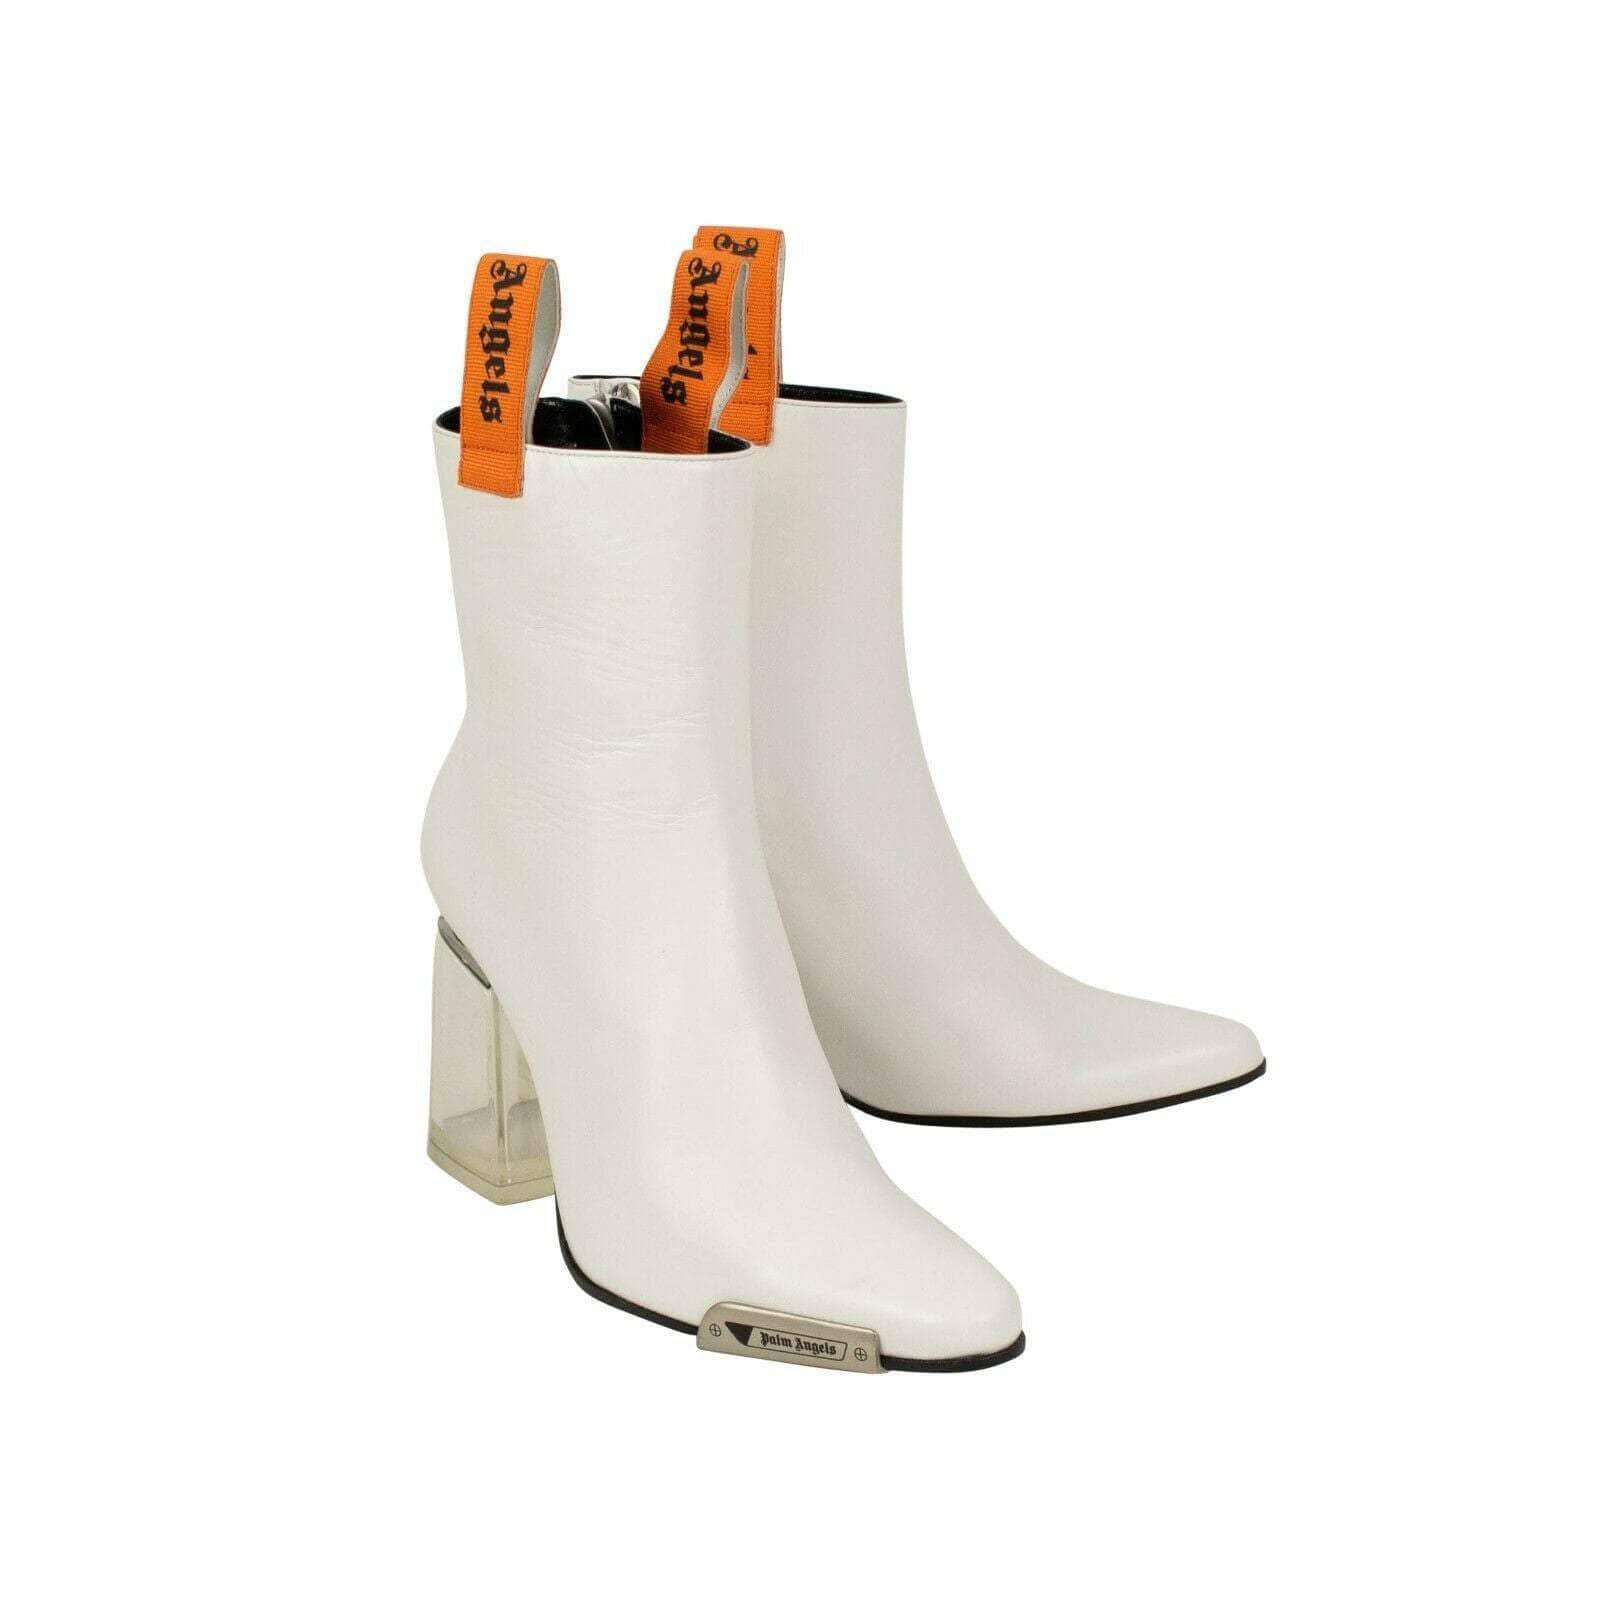 Palm Angels Women's Boots Block Heels Ankle Boots - White